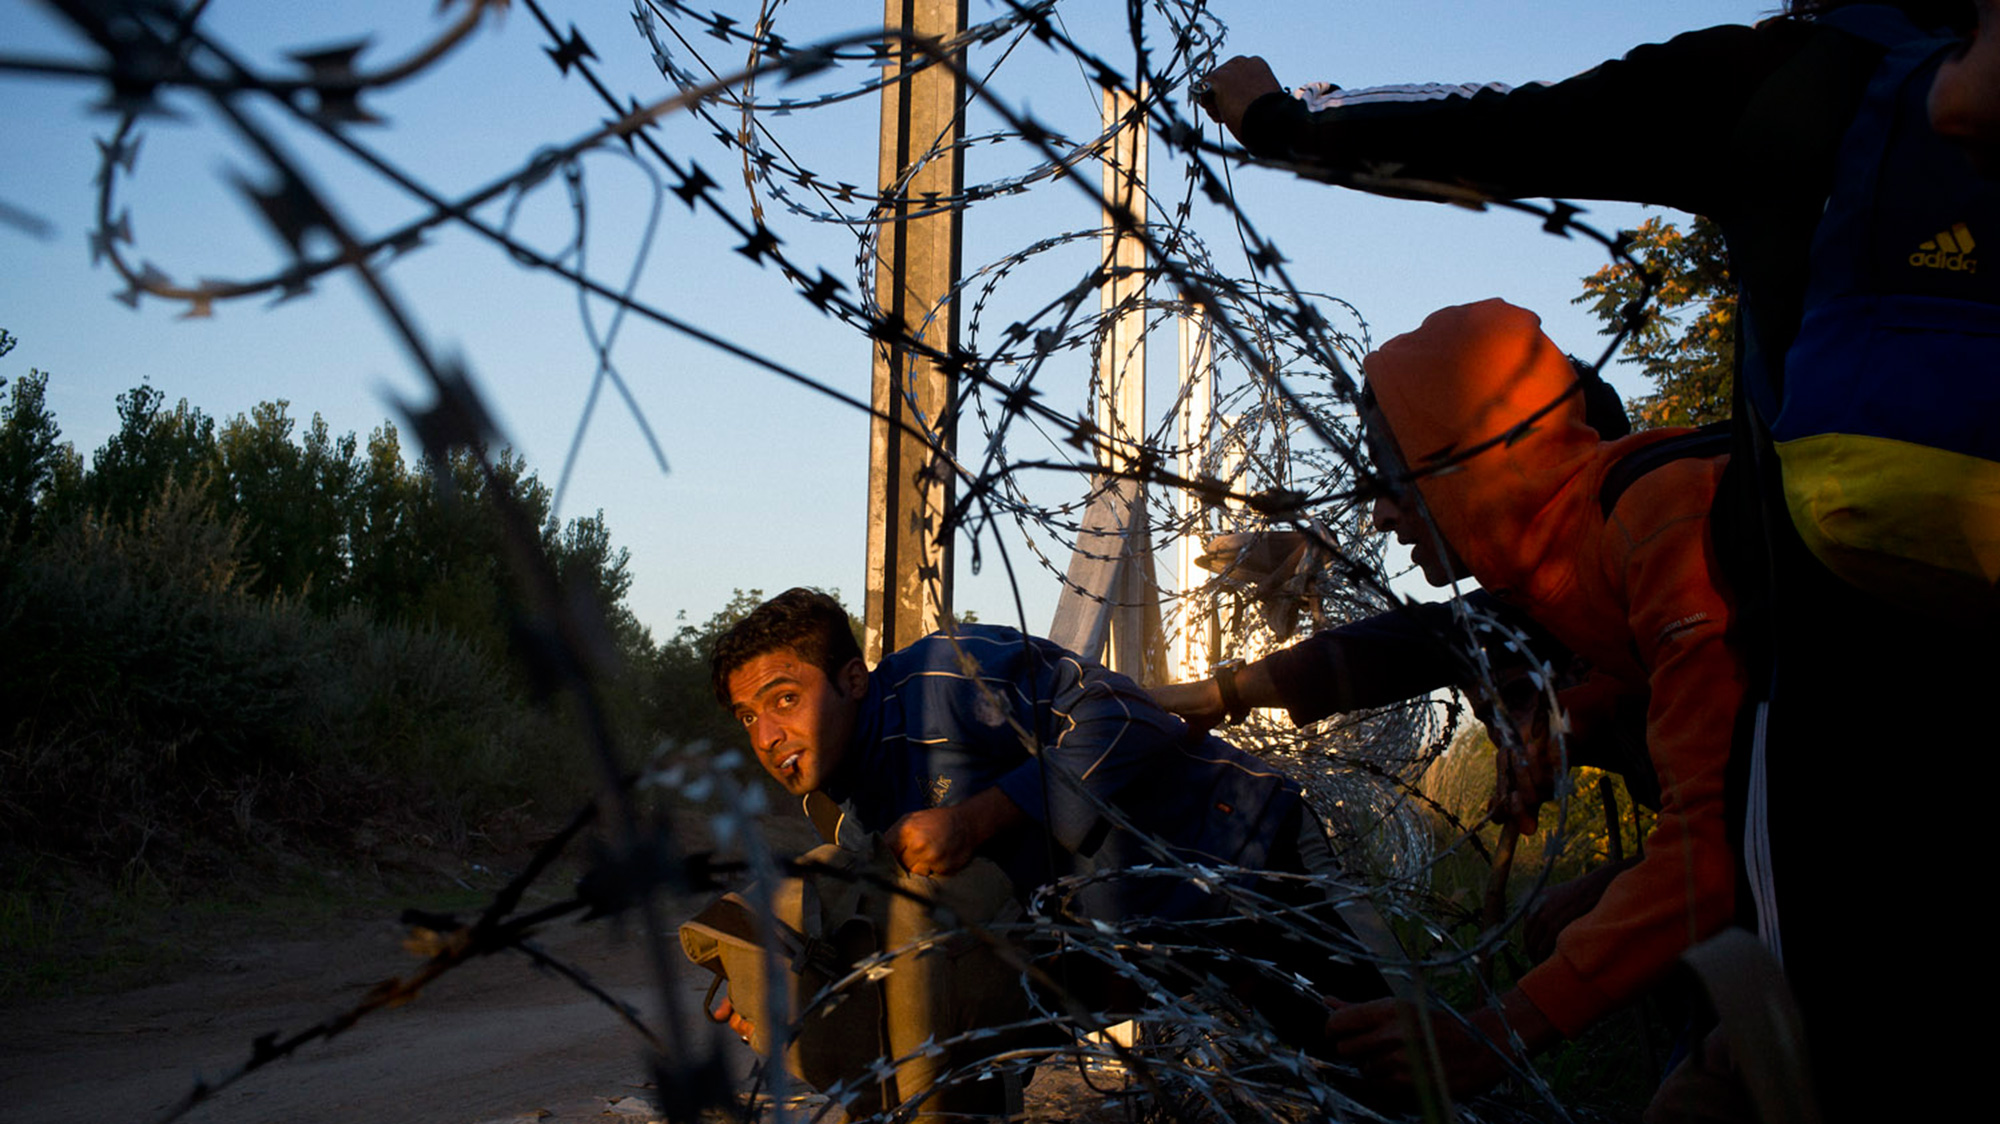 Refugees crossing through barbed wire fence.